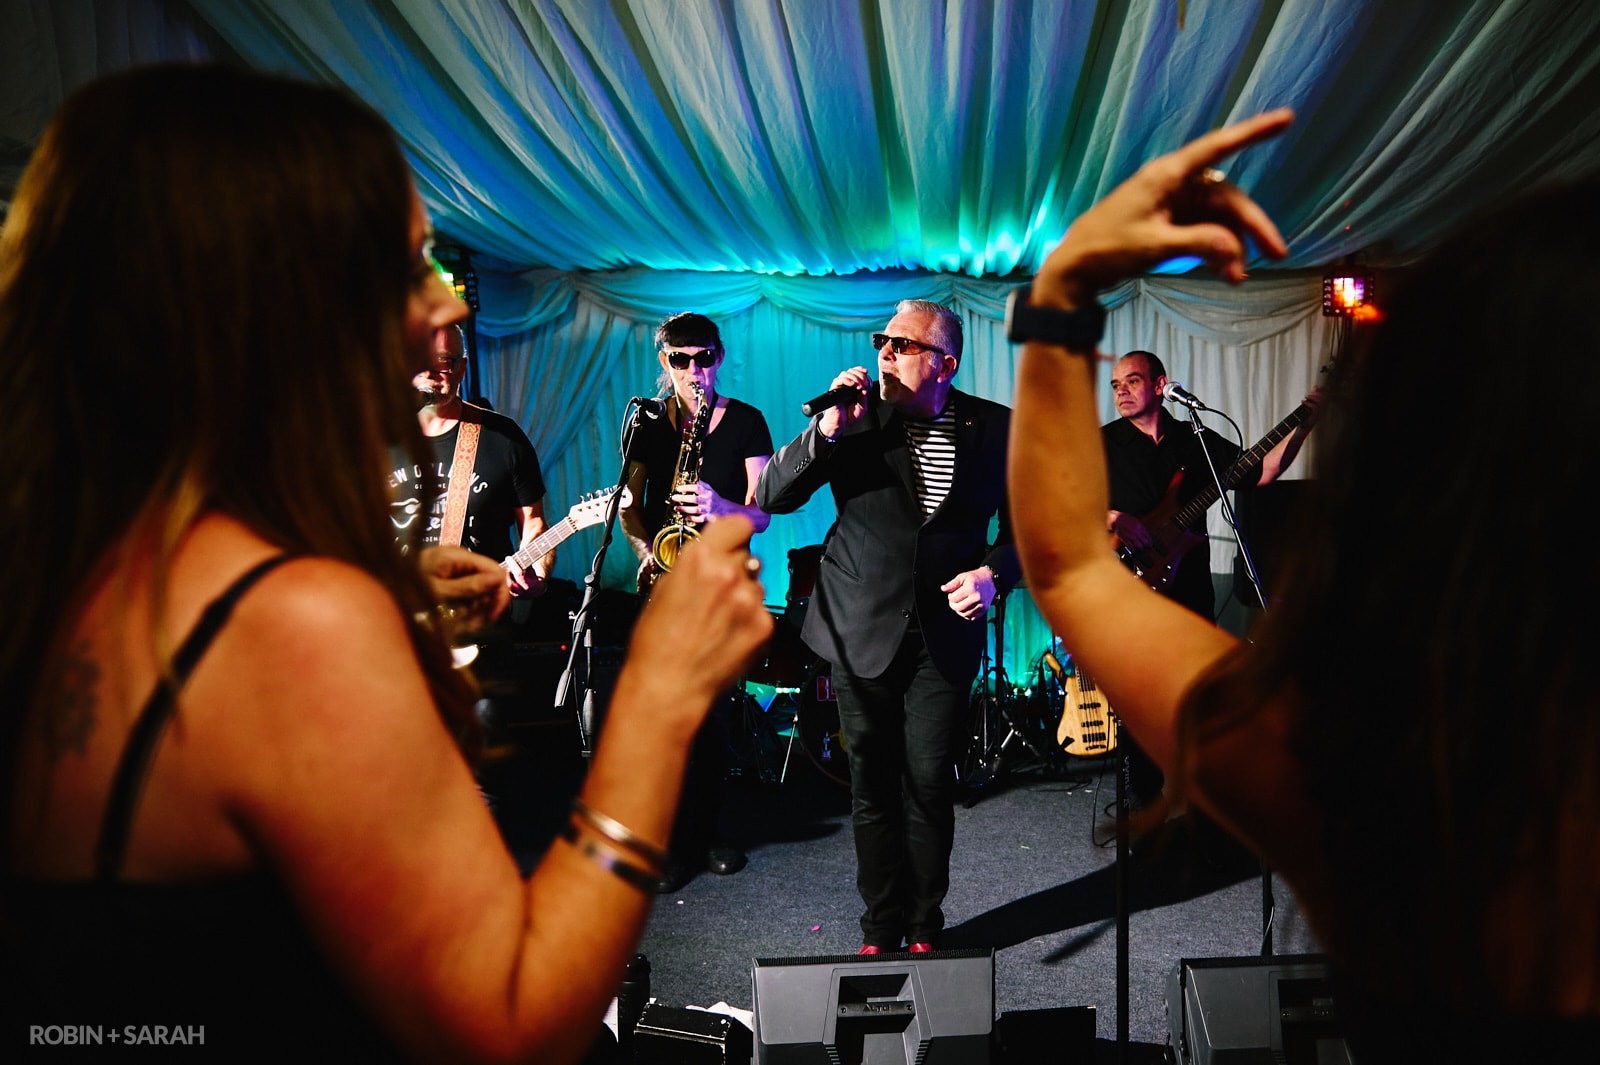 Live band play at wedding as guests dance